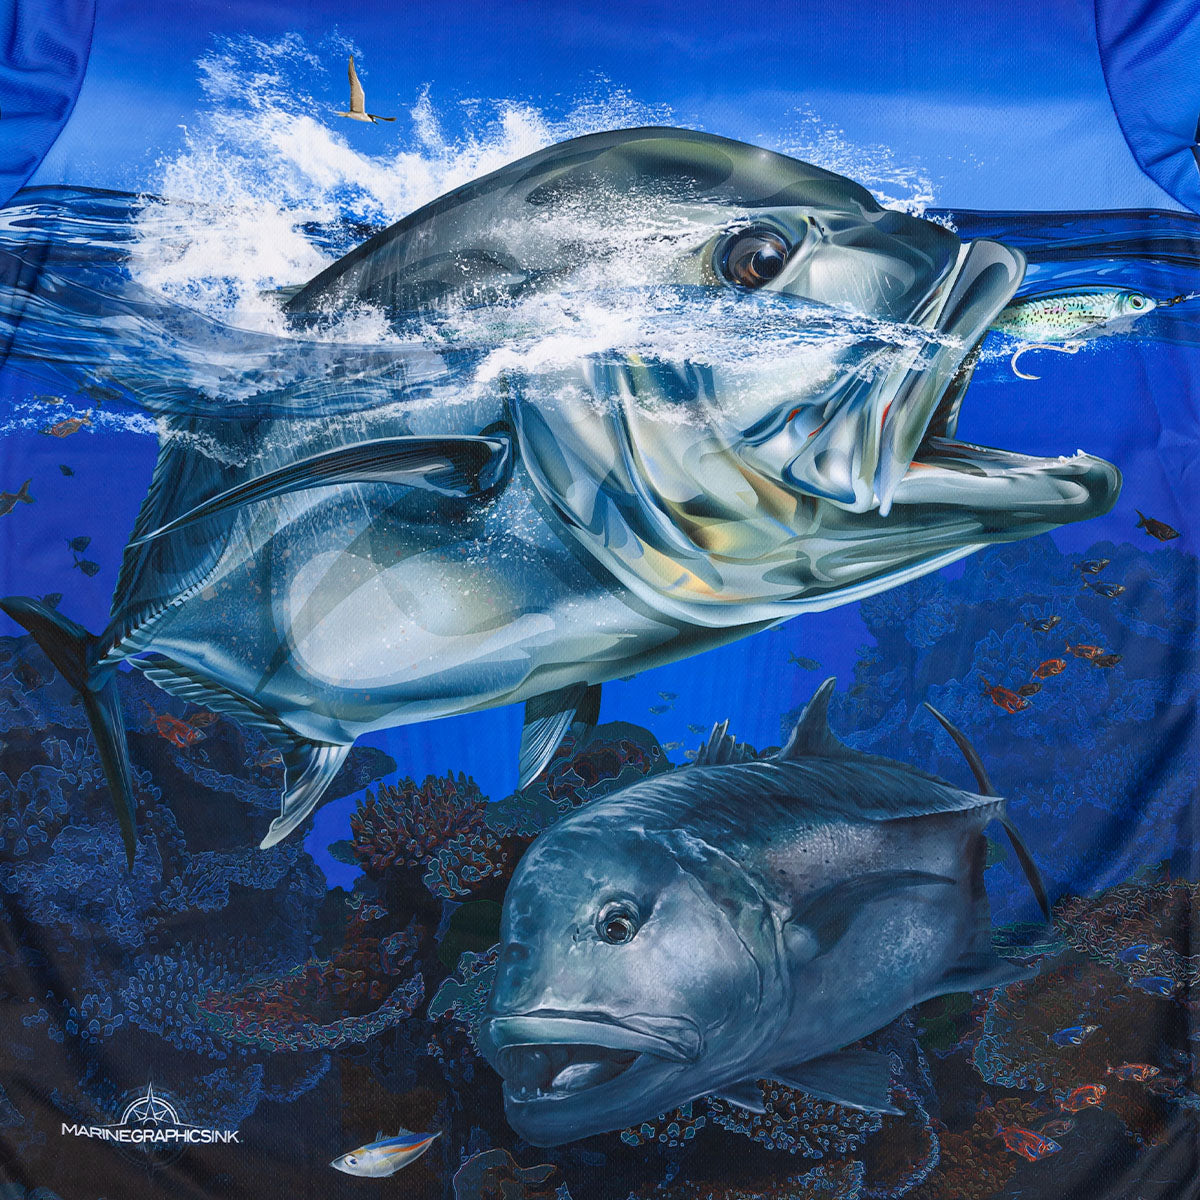 Giant Trevally Fishing Jersey Youth